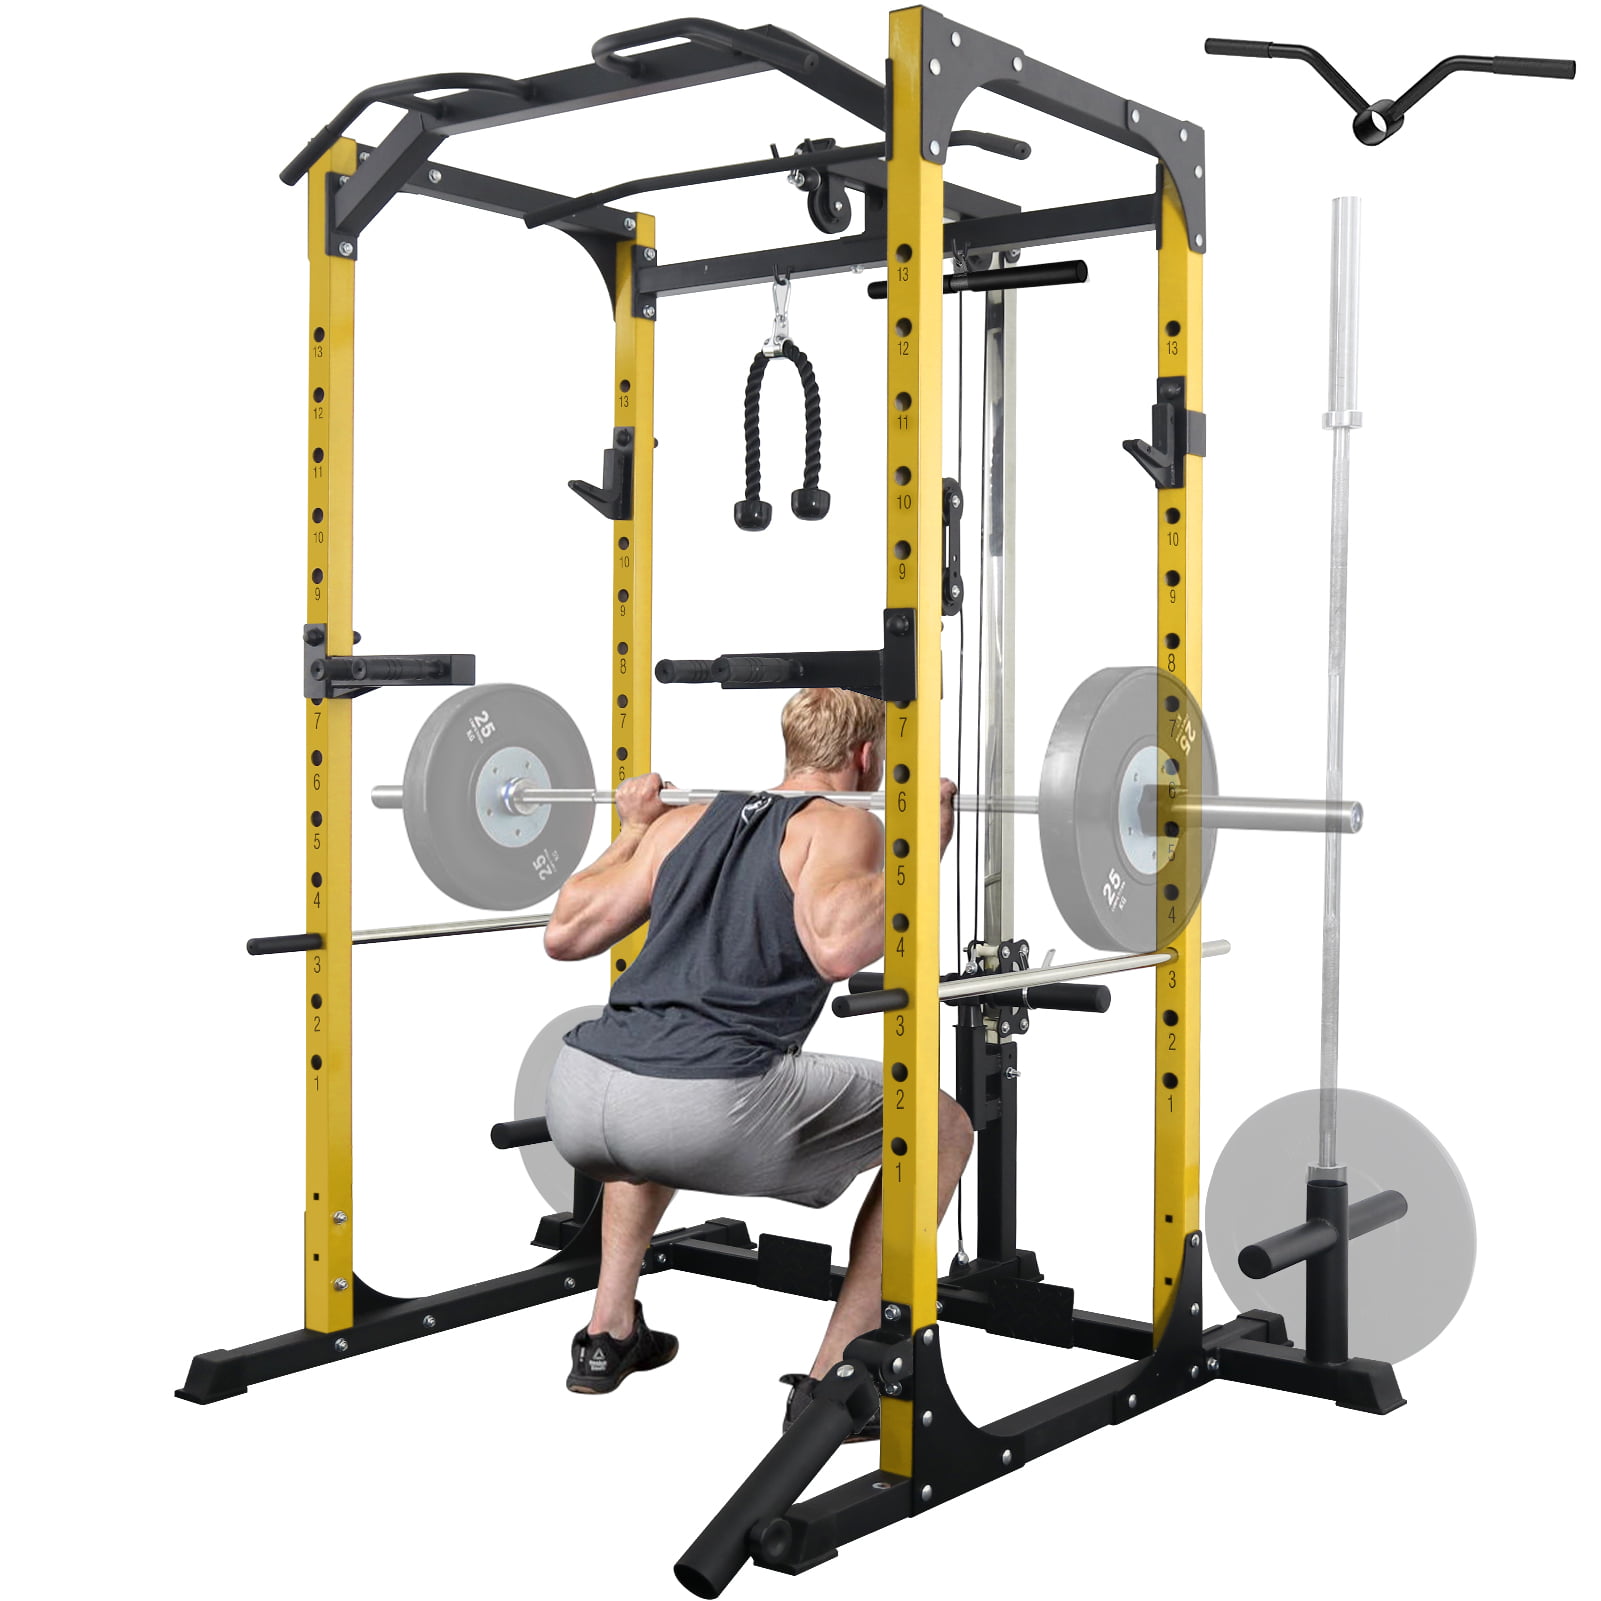 BarBelts Squat Rack Accessory Functional Fitness - Lock The Barbell Into The Rack To Turn Squat Racks Into a Full Gymnastics Suite Muscle Ups Sold as a Pair Home Gym Gymnastics Bar 